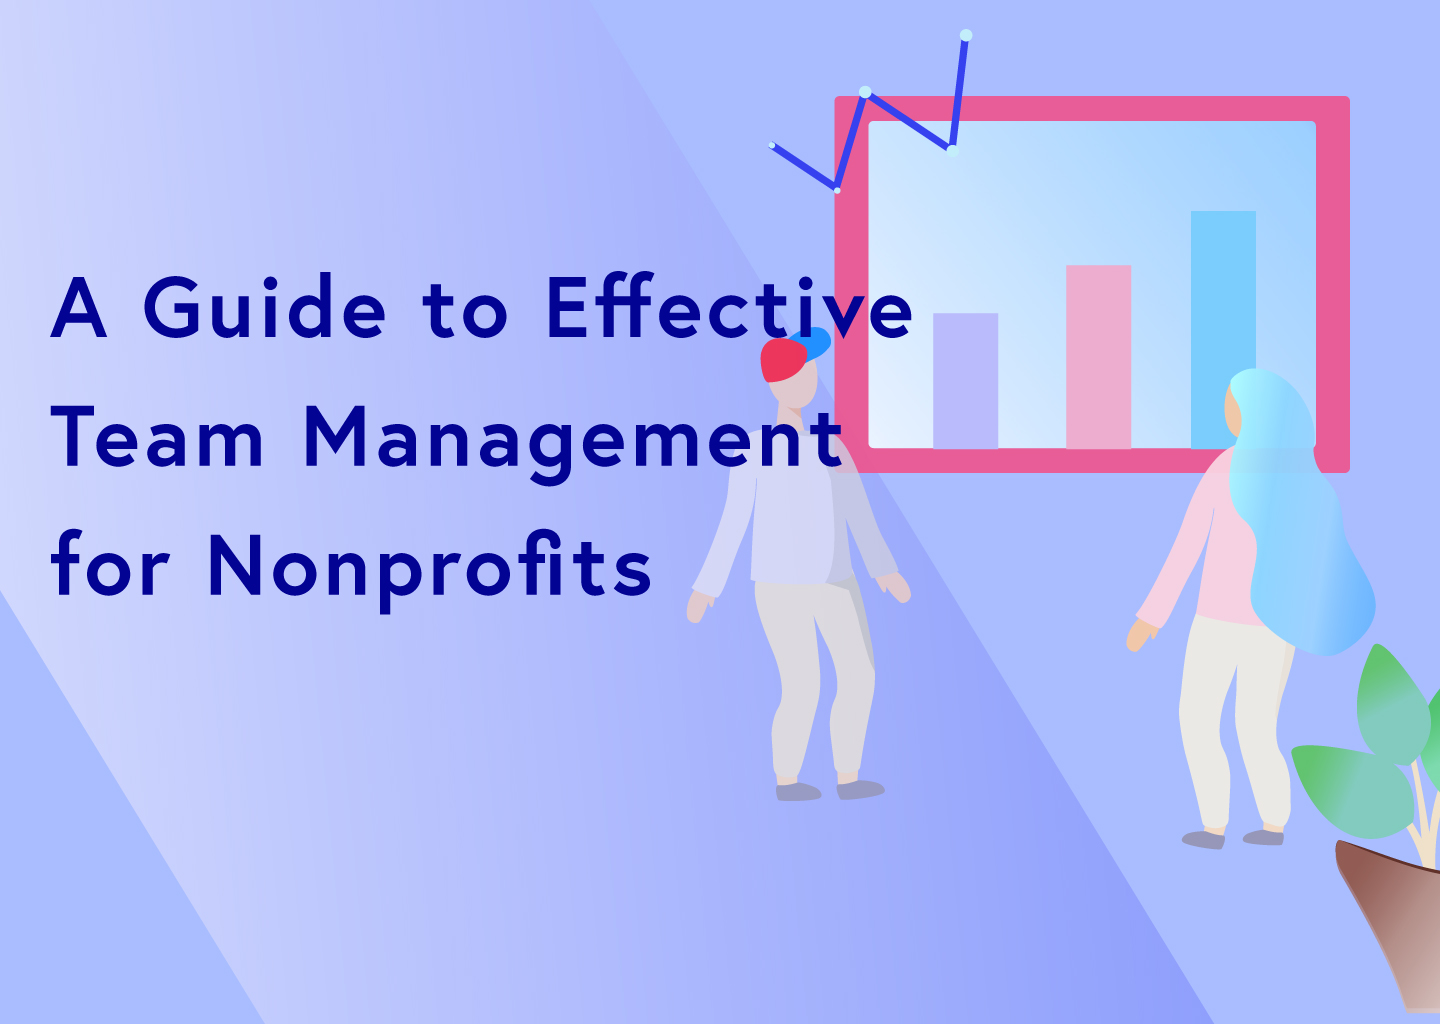 A Guide To Effective Team Management For Nonprofits